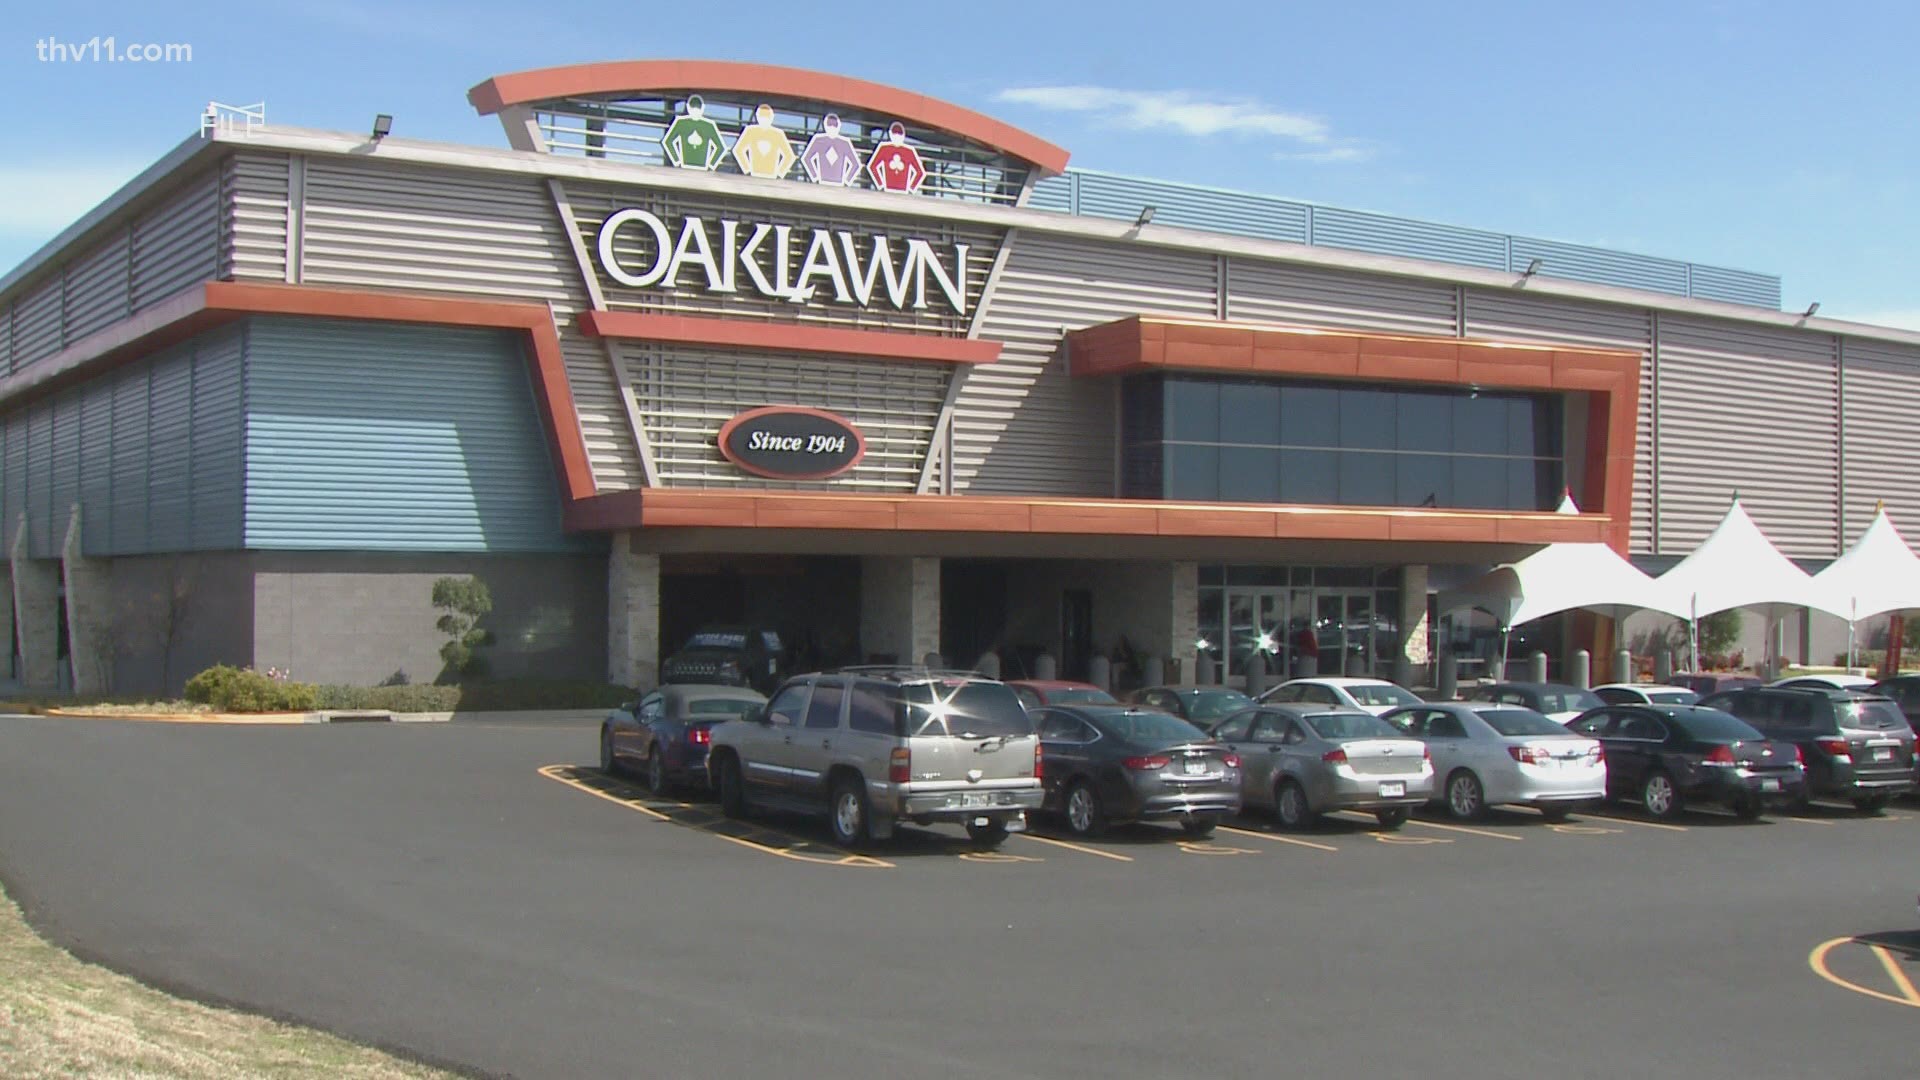 Oaklawn Racing and Gaming is inviting live racing fans back to Hot Springs.